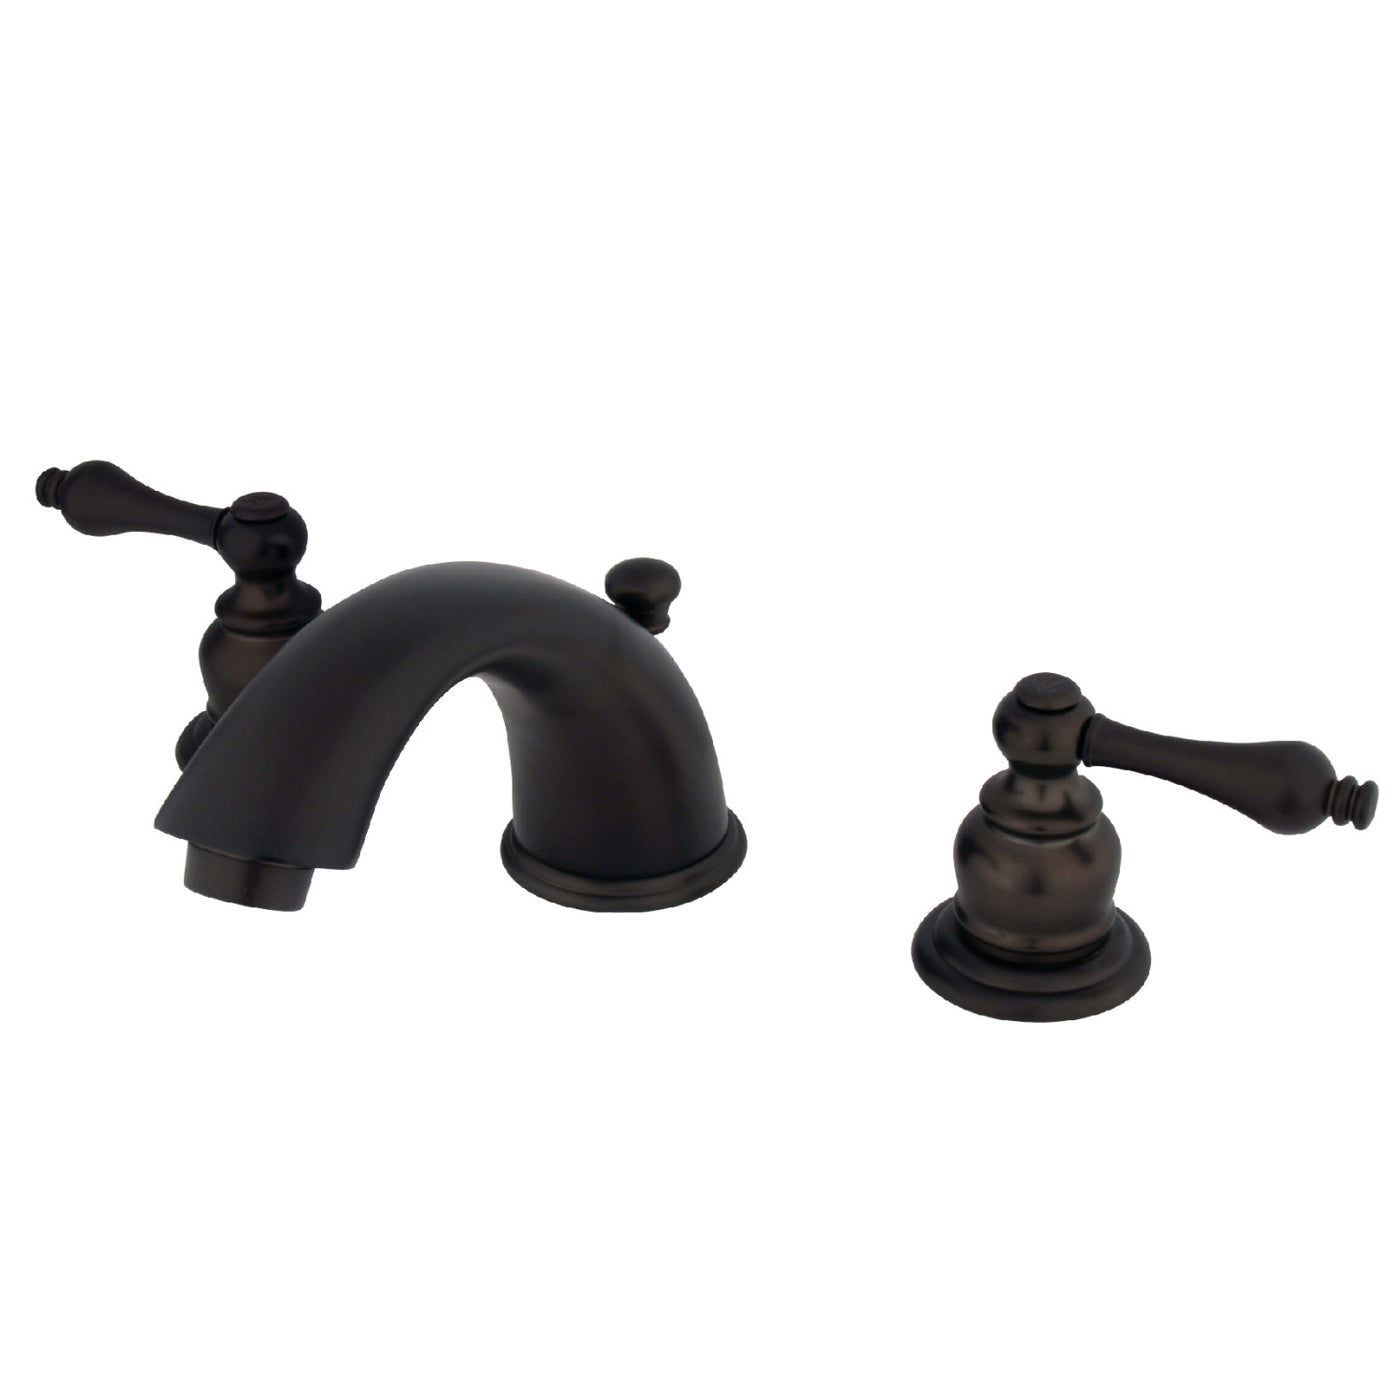 Elements of Design EB975AL Widespread Bathroom Faucet with Retail Pop-Up, Oil Rubbed Bronze